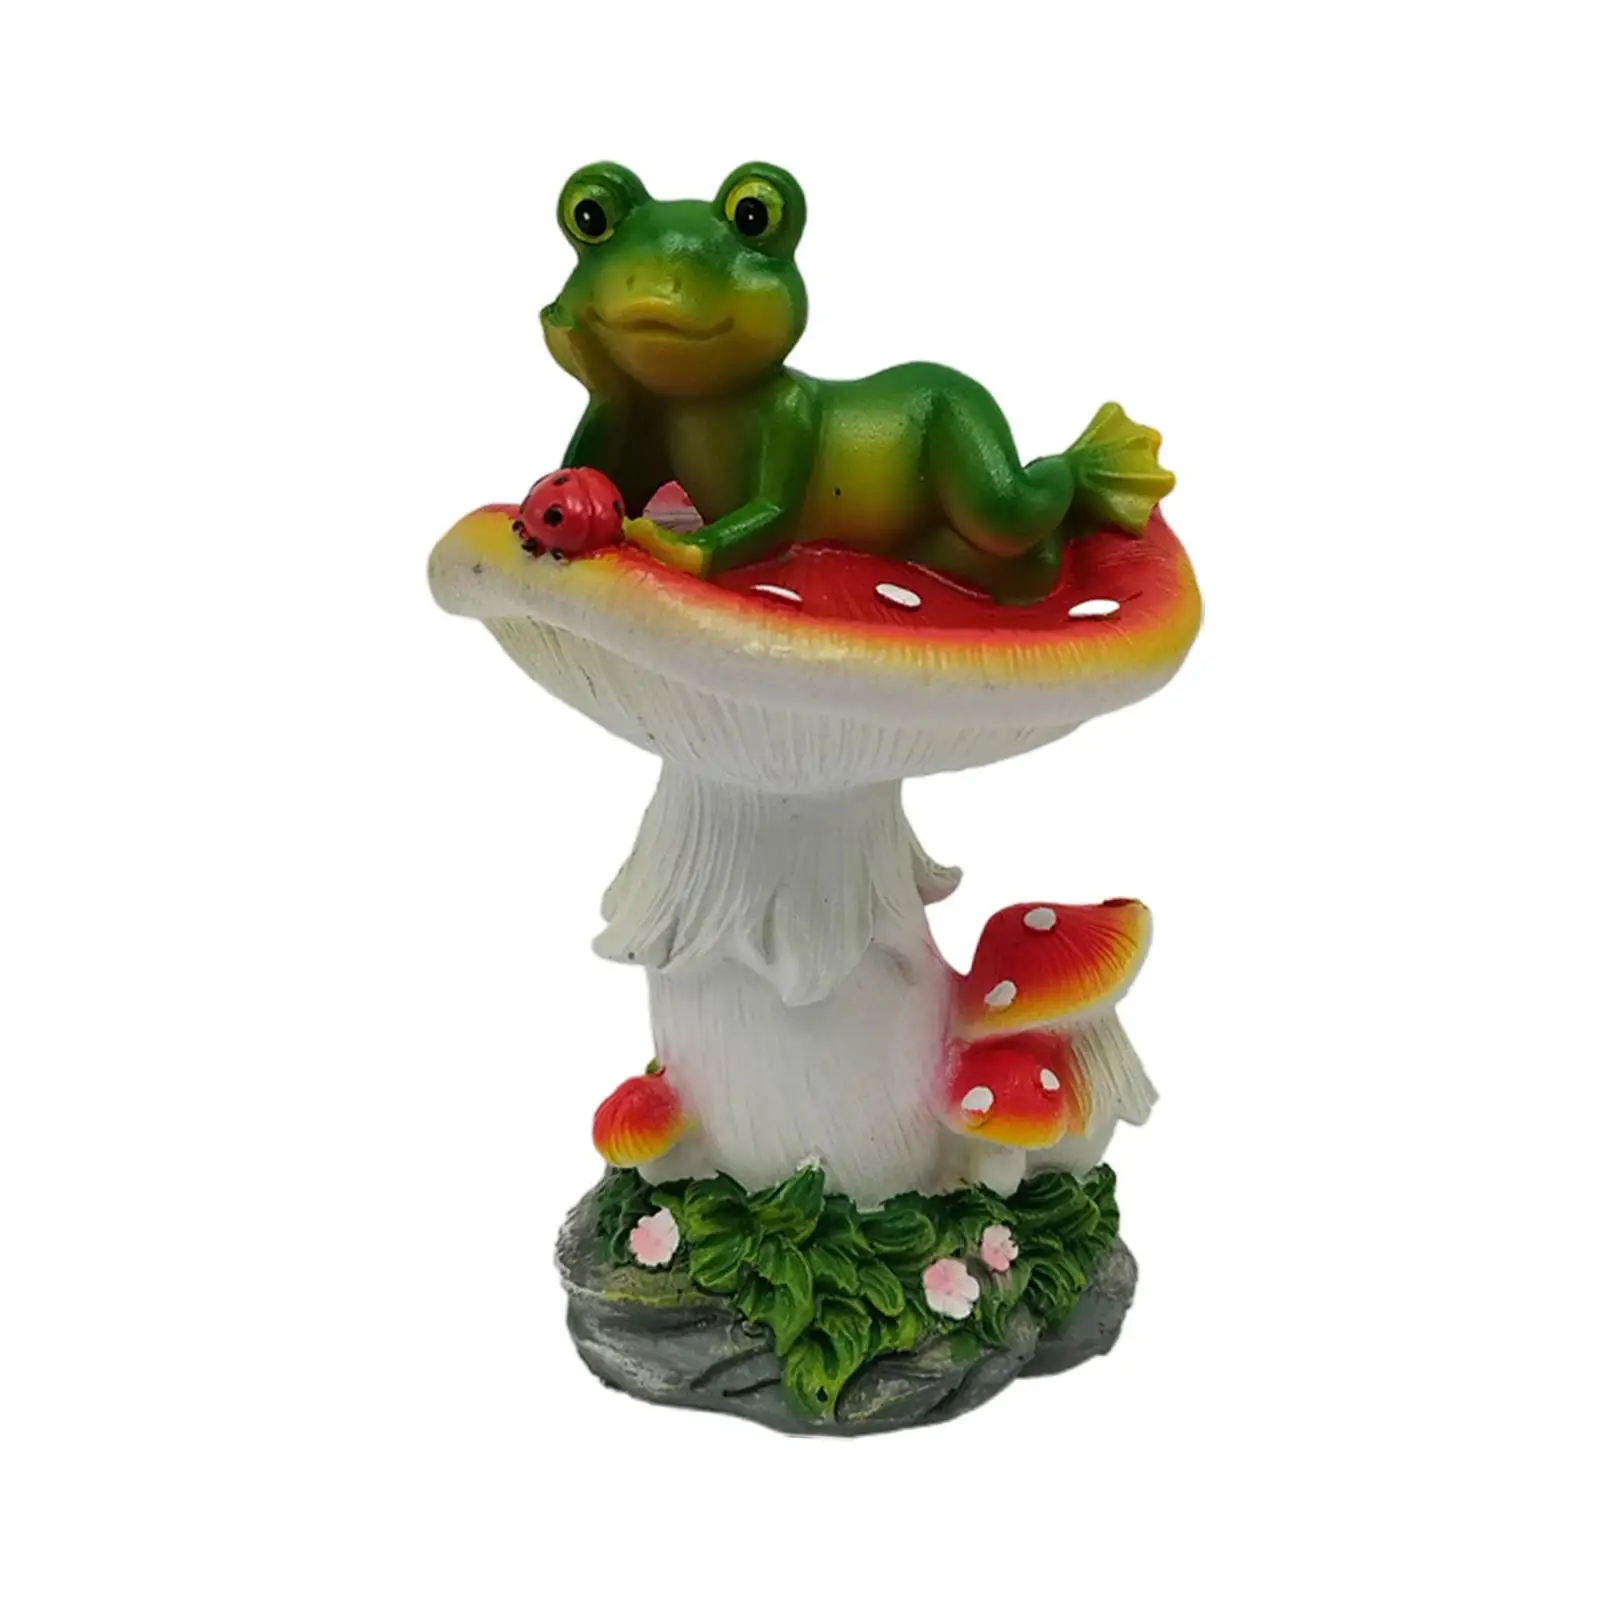 Adorable Frogs Sculpture Novelty Collectibles Frog Statues Frog Laying on for Shelf Home Accent Outside Porch Yard